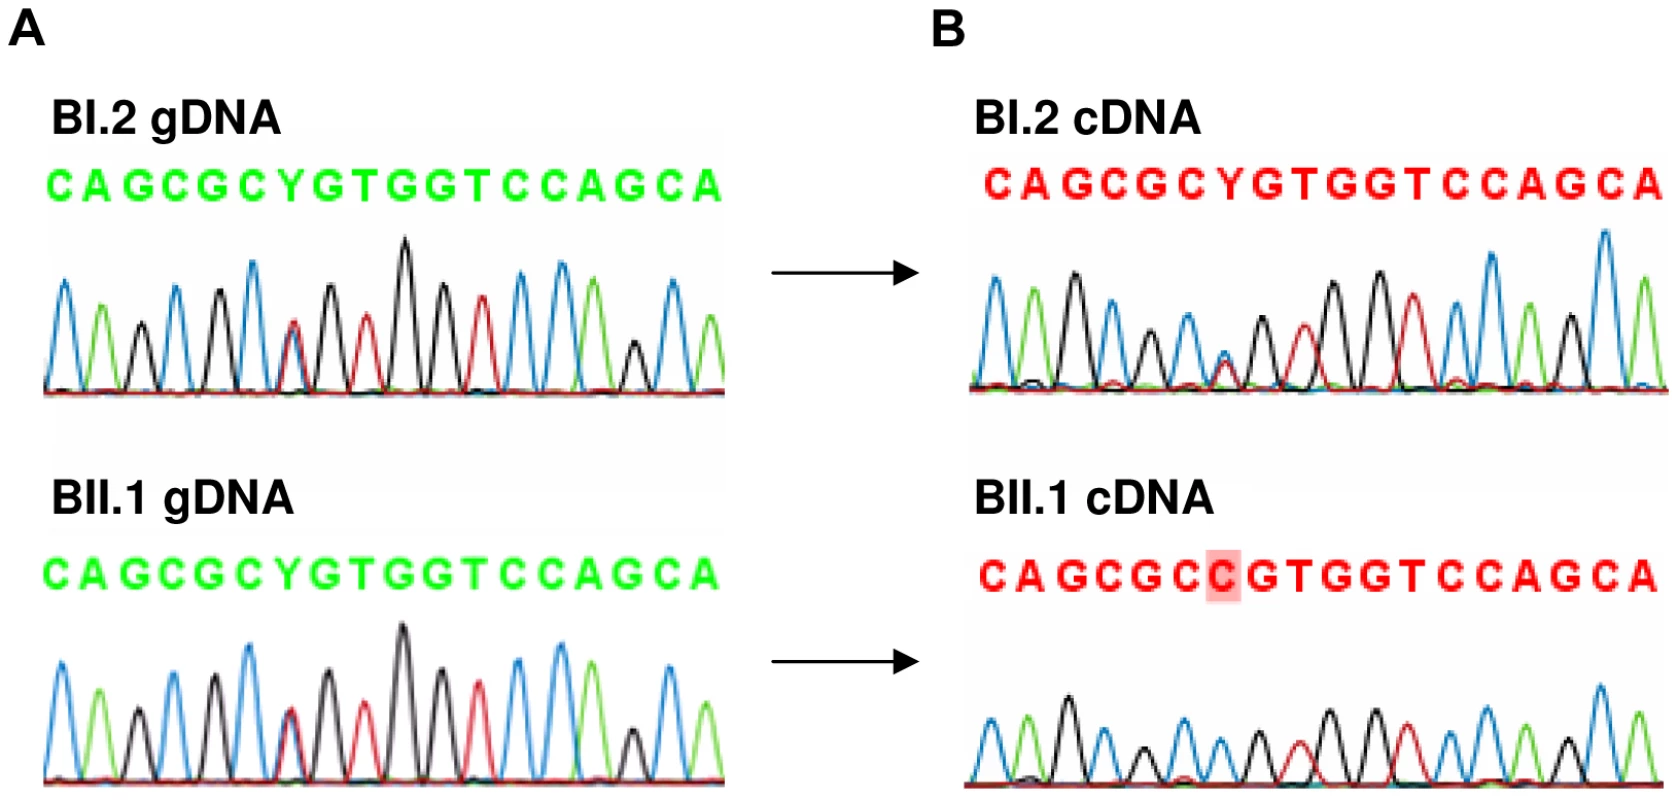 Analysis of rs4851214 which maps to coding exon 14 of <i>AFF3</i> using paired genomic DNA and cDNA templates from the unaffected carrier mother BI.2 and the affected carrier son BII.1 from family B.